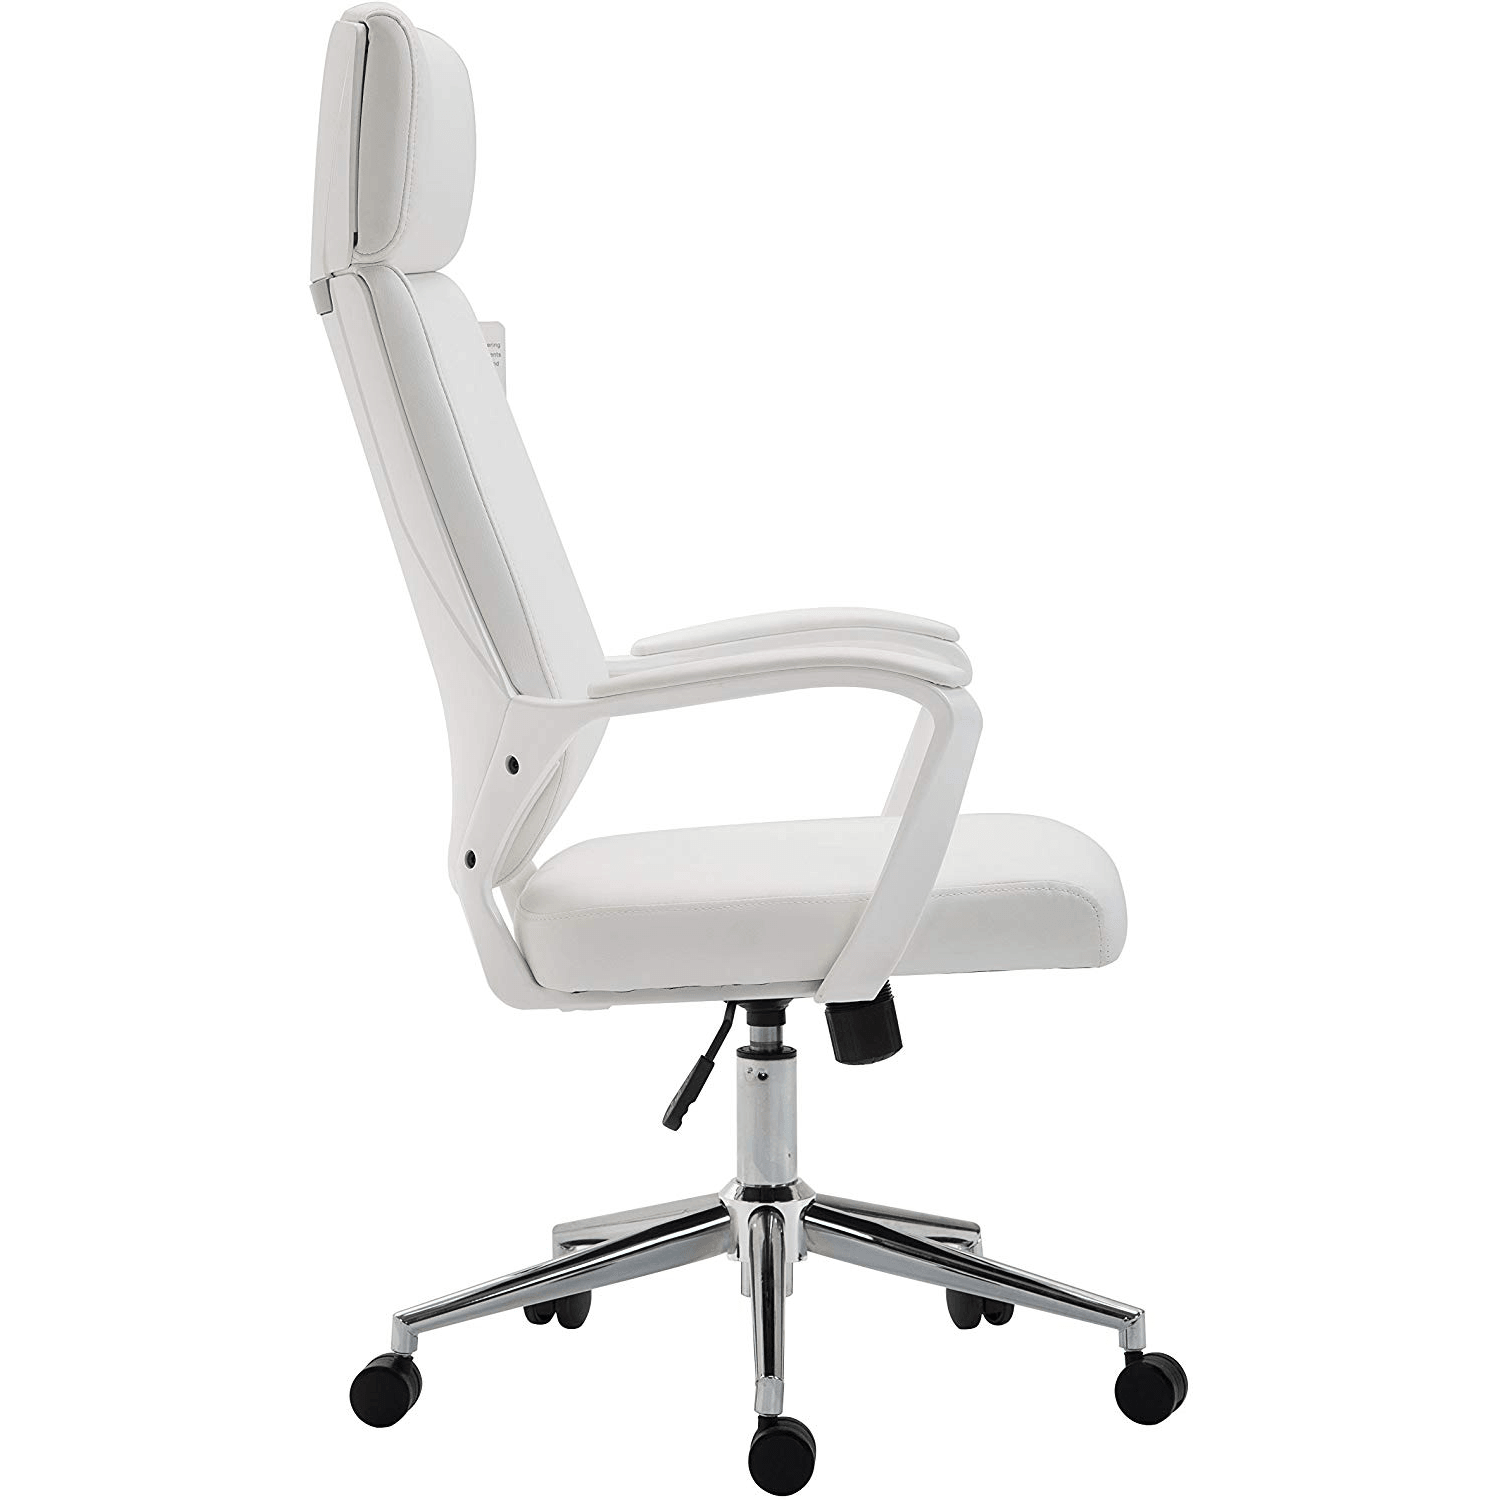 Cherry Tree Furniture High Back Modern Design PU Leather Swivel Office Chair Computer Desk Chair, MO68 White